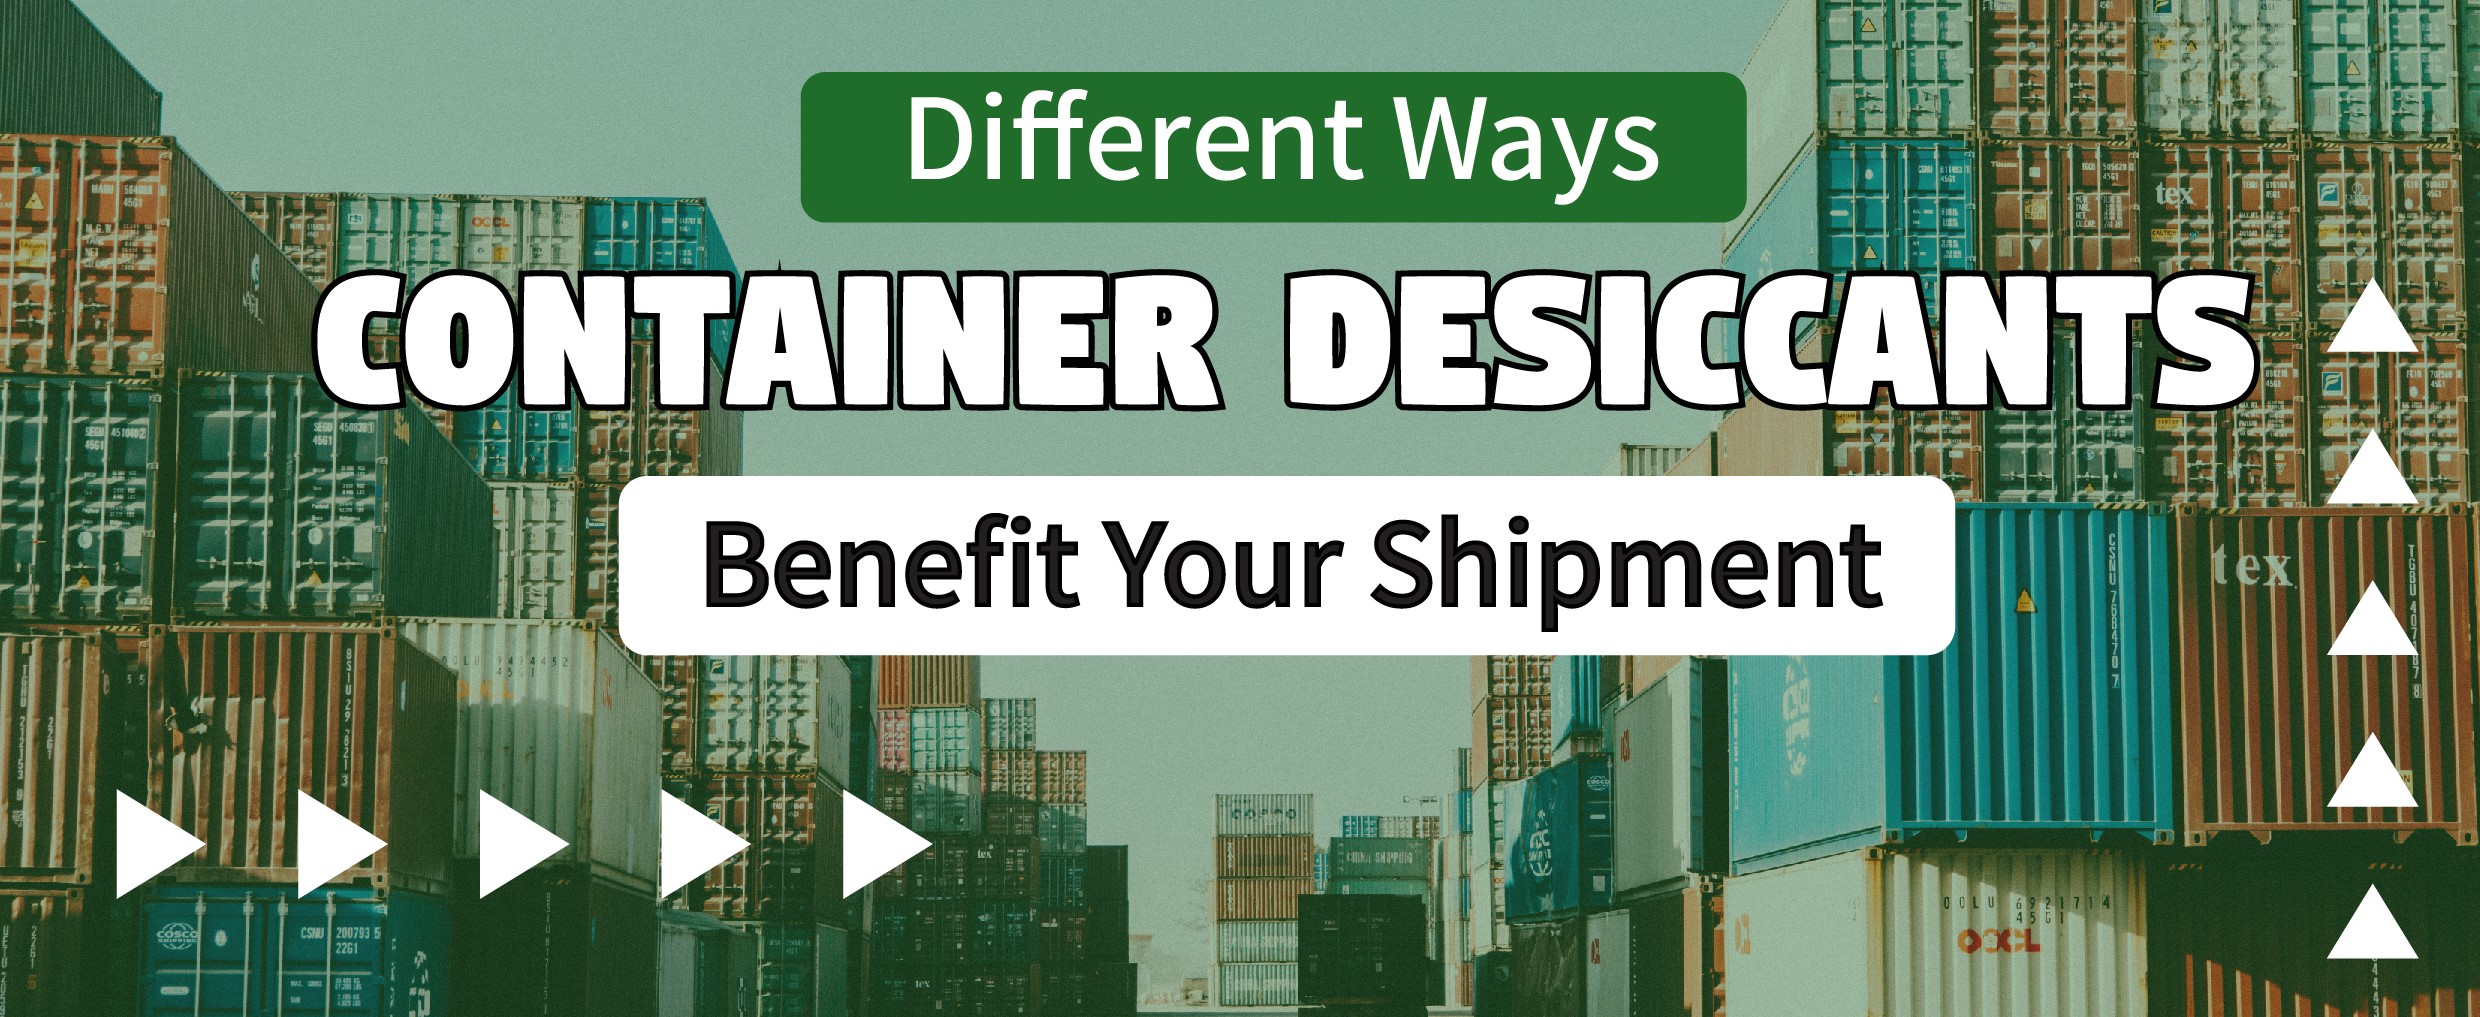 Different Ways Container Desiccants Benefit Your Shipment